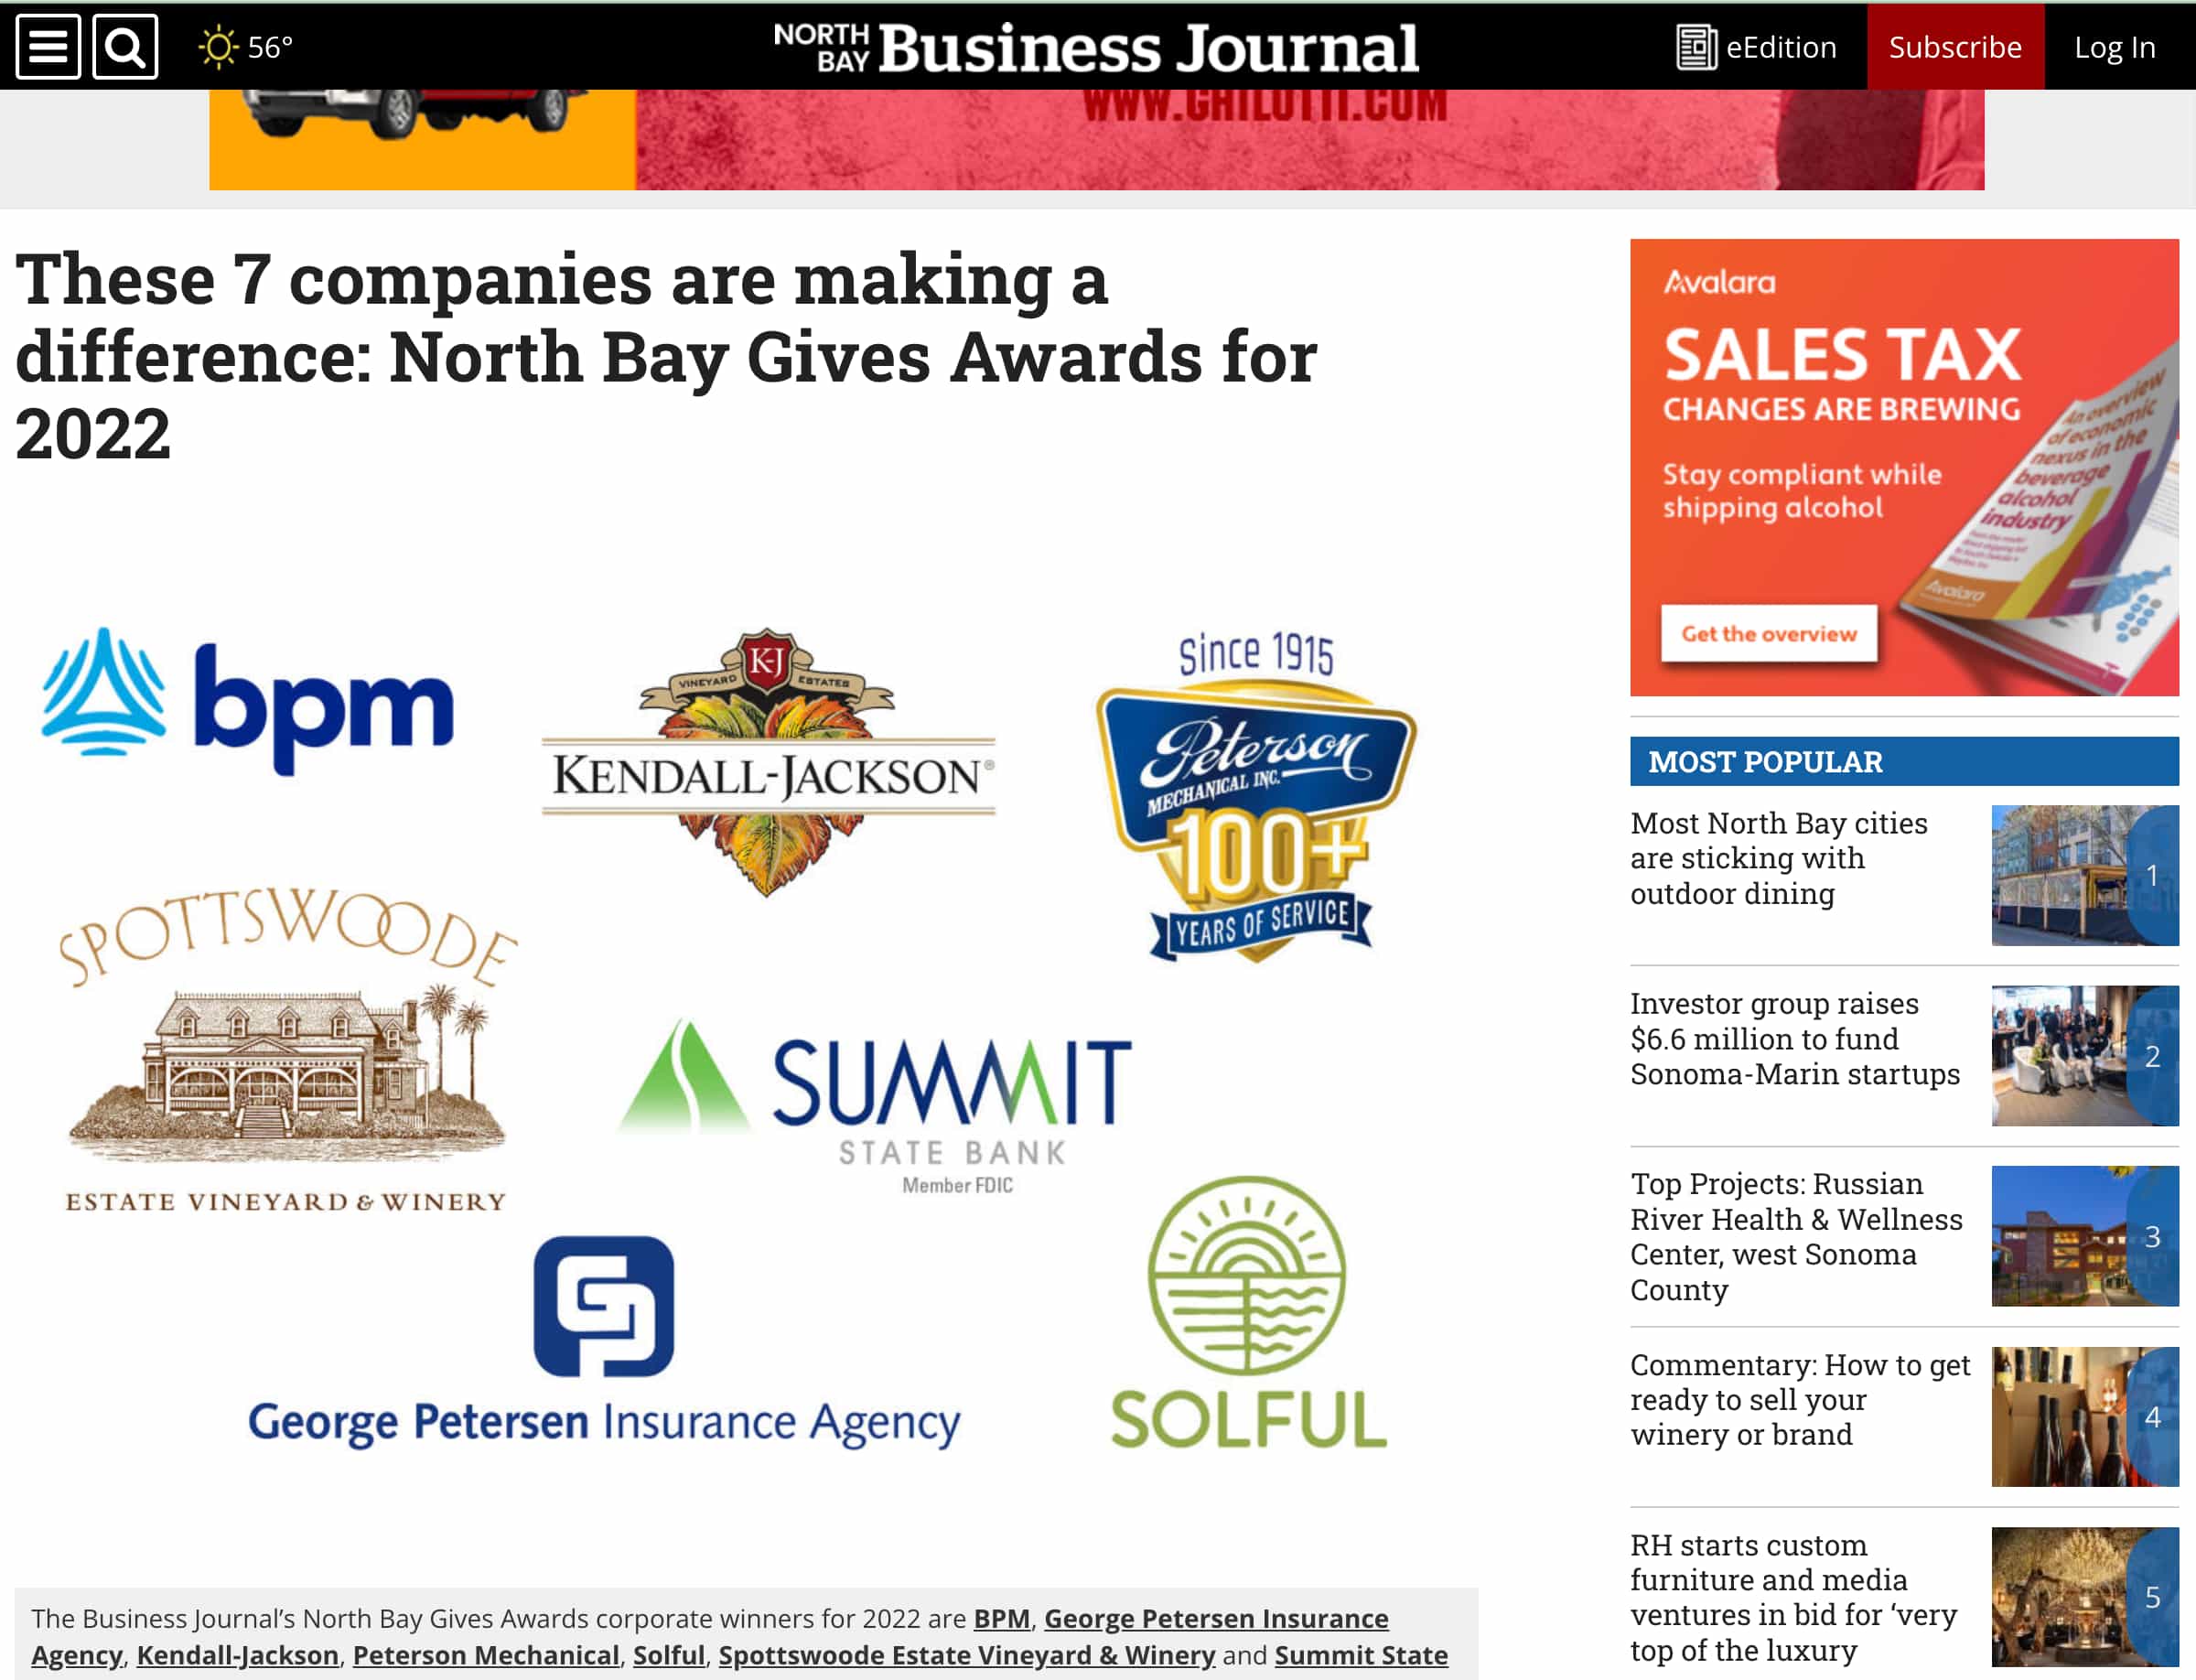 Image of NORTH BAY BUSINESS JOURNAL